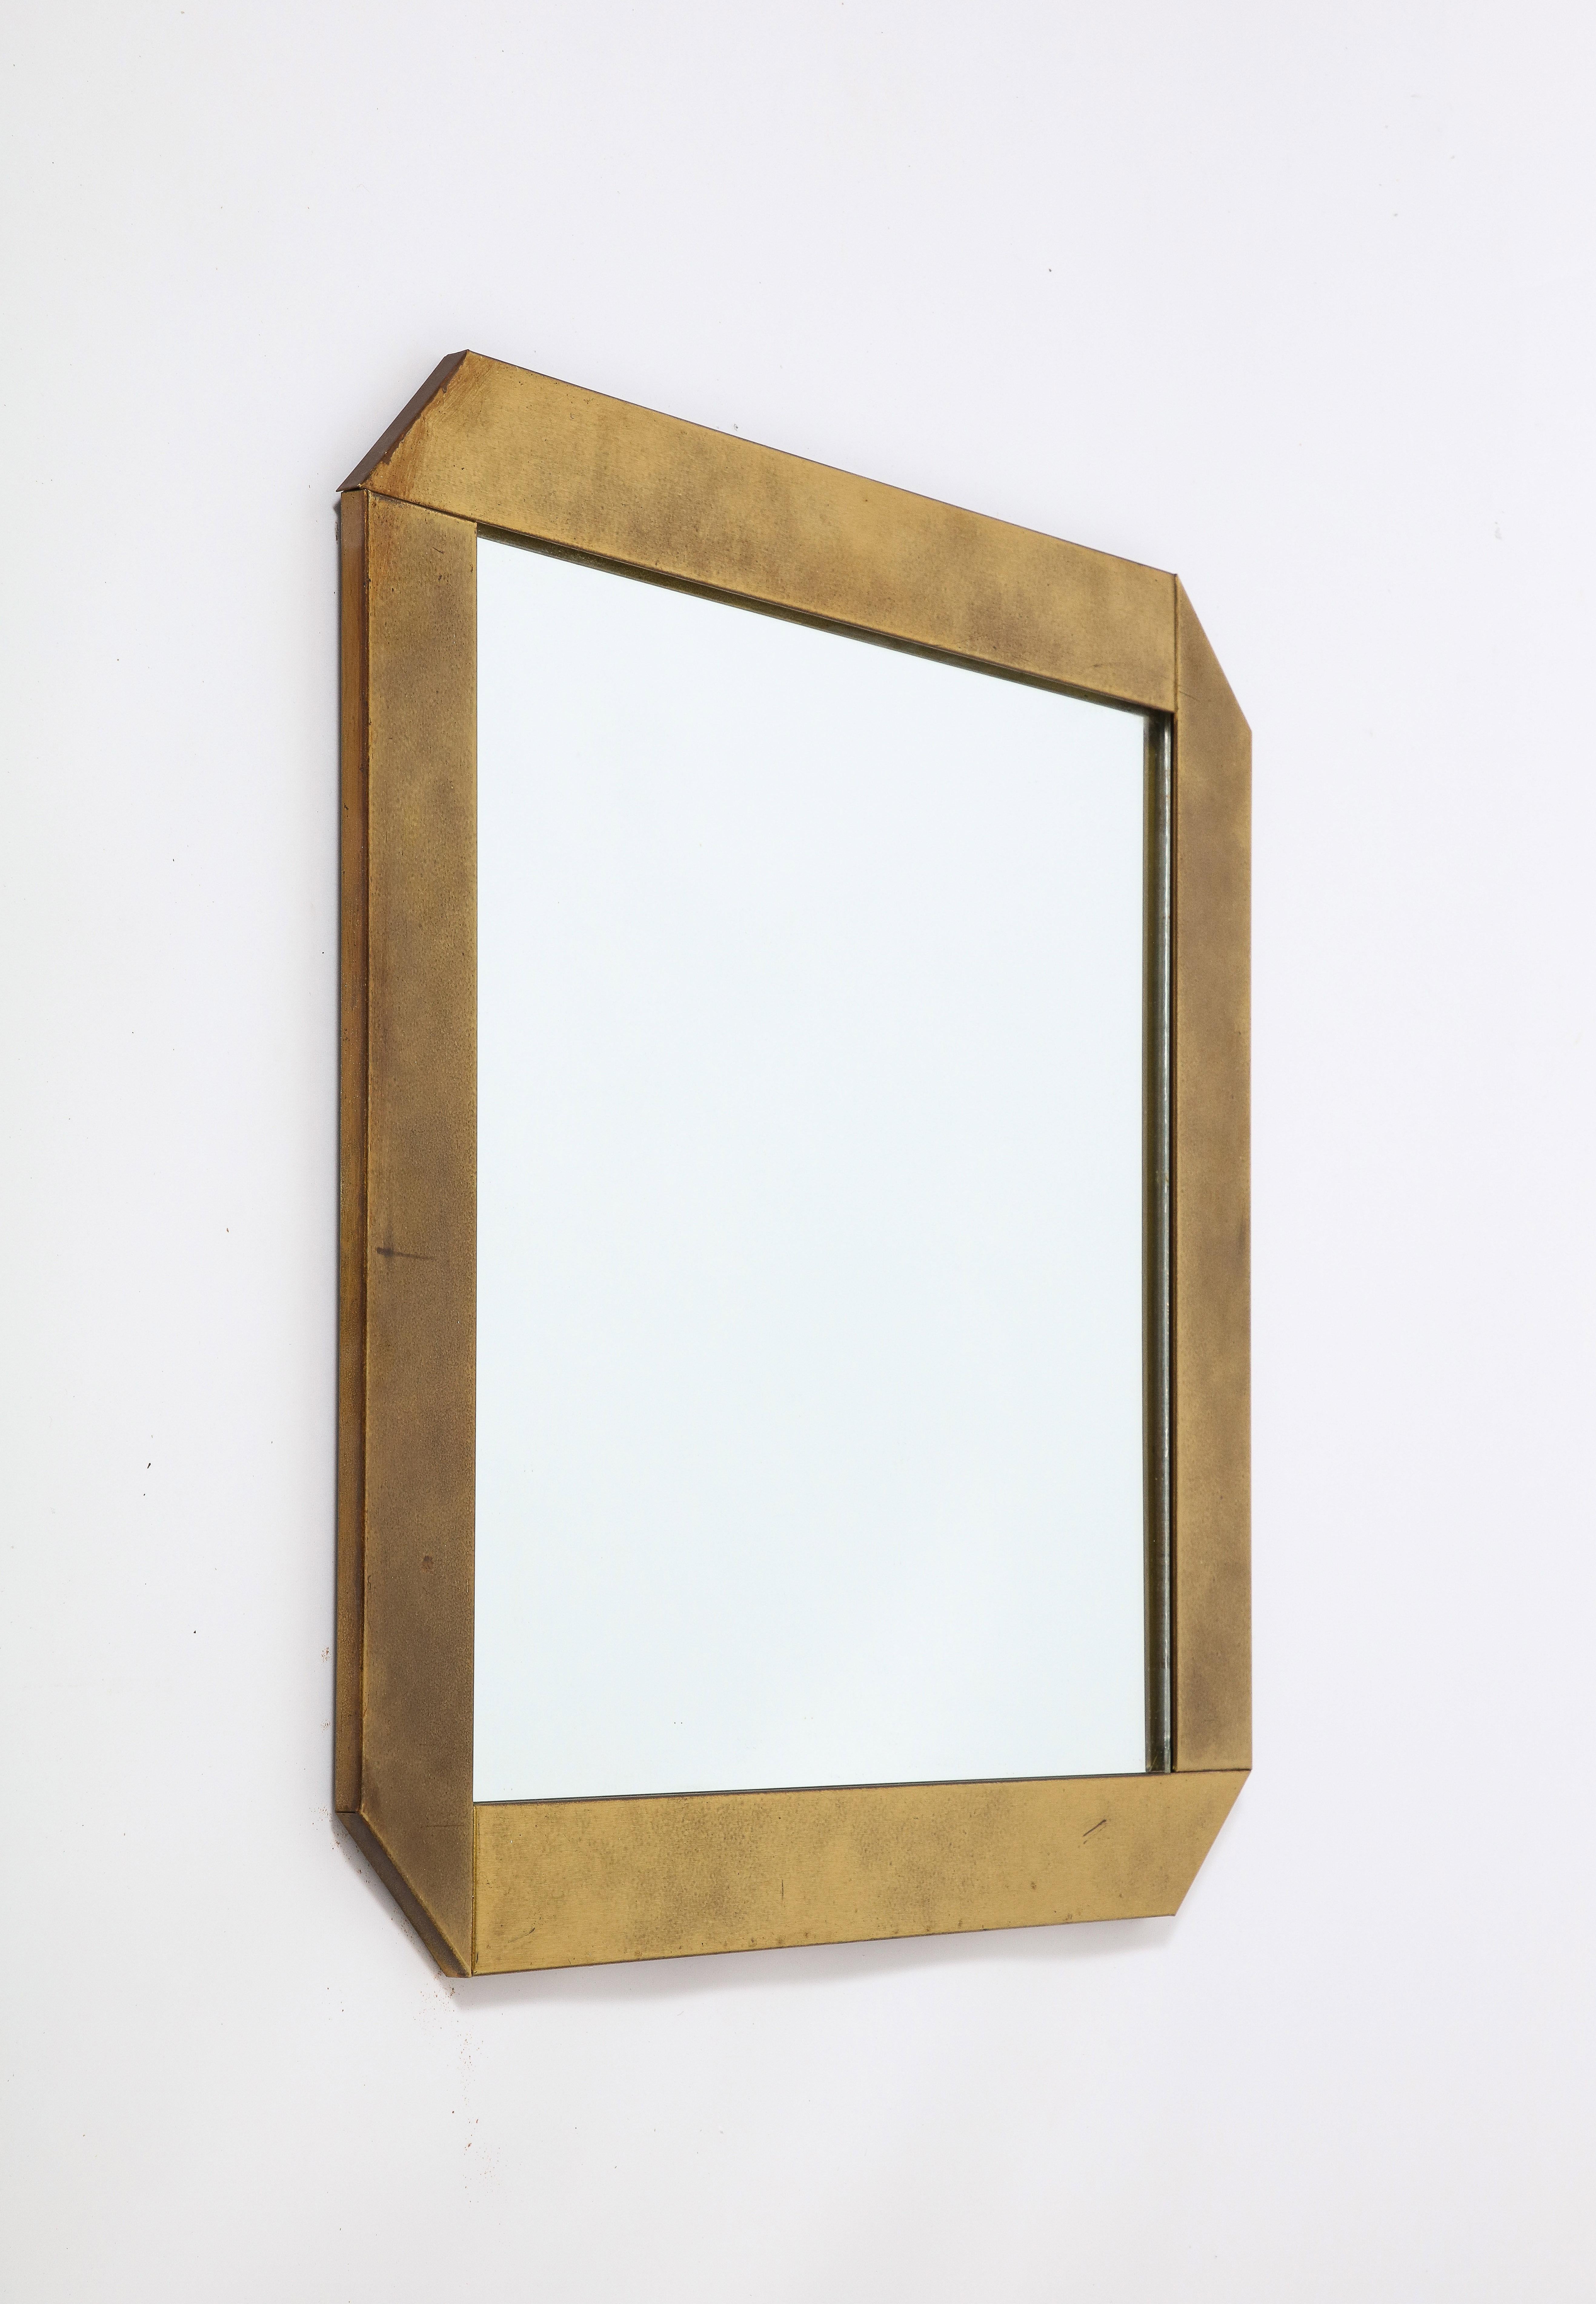 An Italian 1970's brushed brass square mirror with canted corners, designed by Gaetano Sciolari for Valenti Luce.  The brass a warm and rich coloring, highlights the sleek and modernist design. 
By Gaetano Sciolari for Valenti Luce, Italy, circa